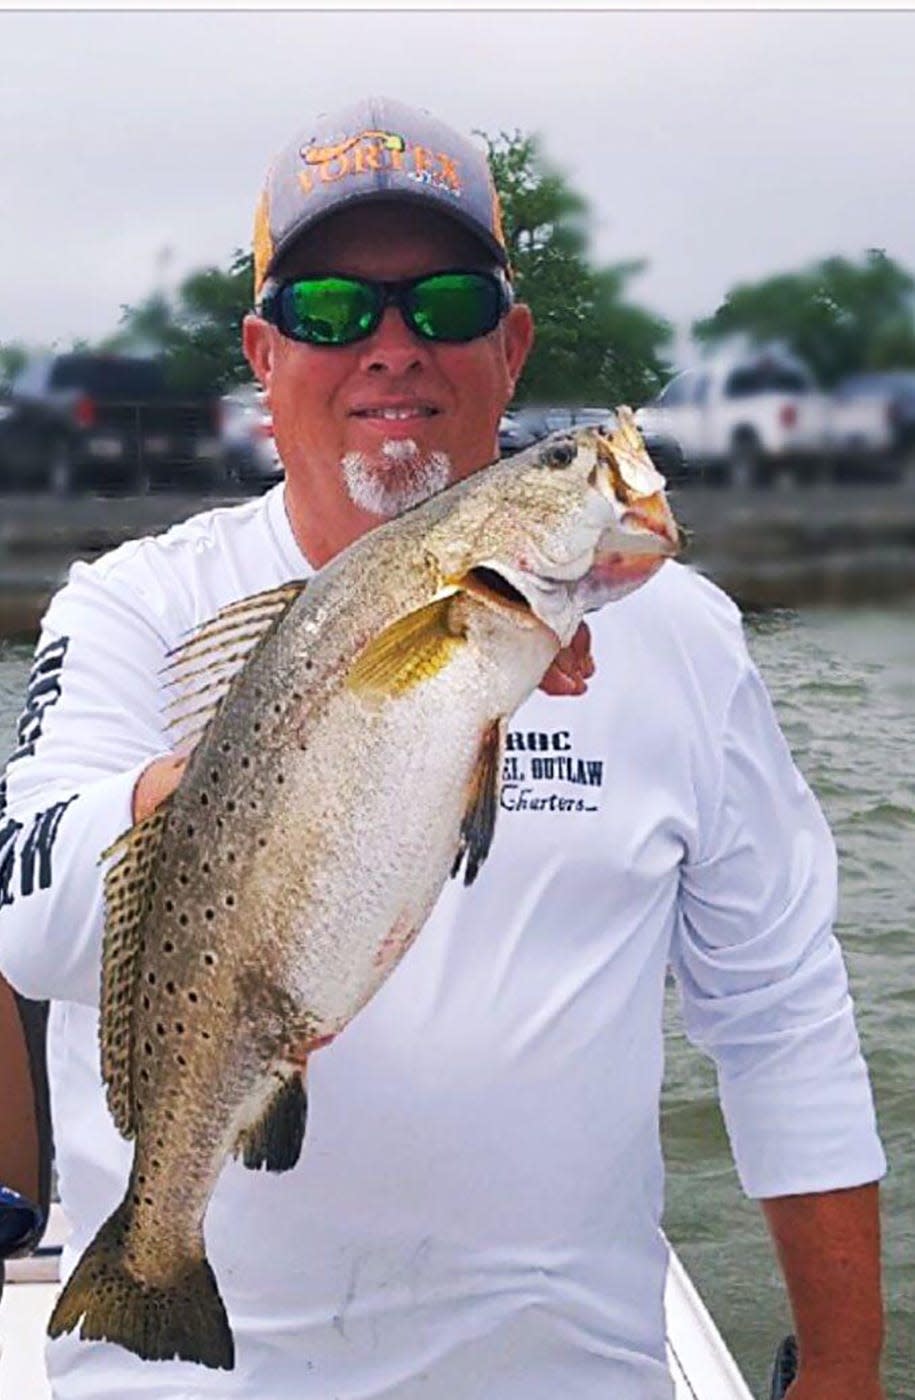 Bill Hancock of Reel Outlaw Charters said big speckled trout are being caught on the Mississippi coast and plenty of them.